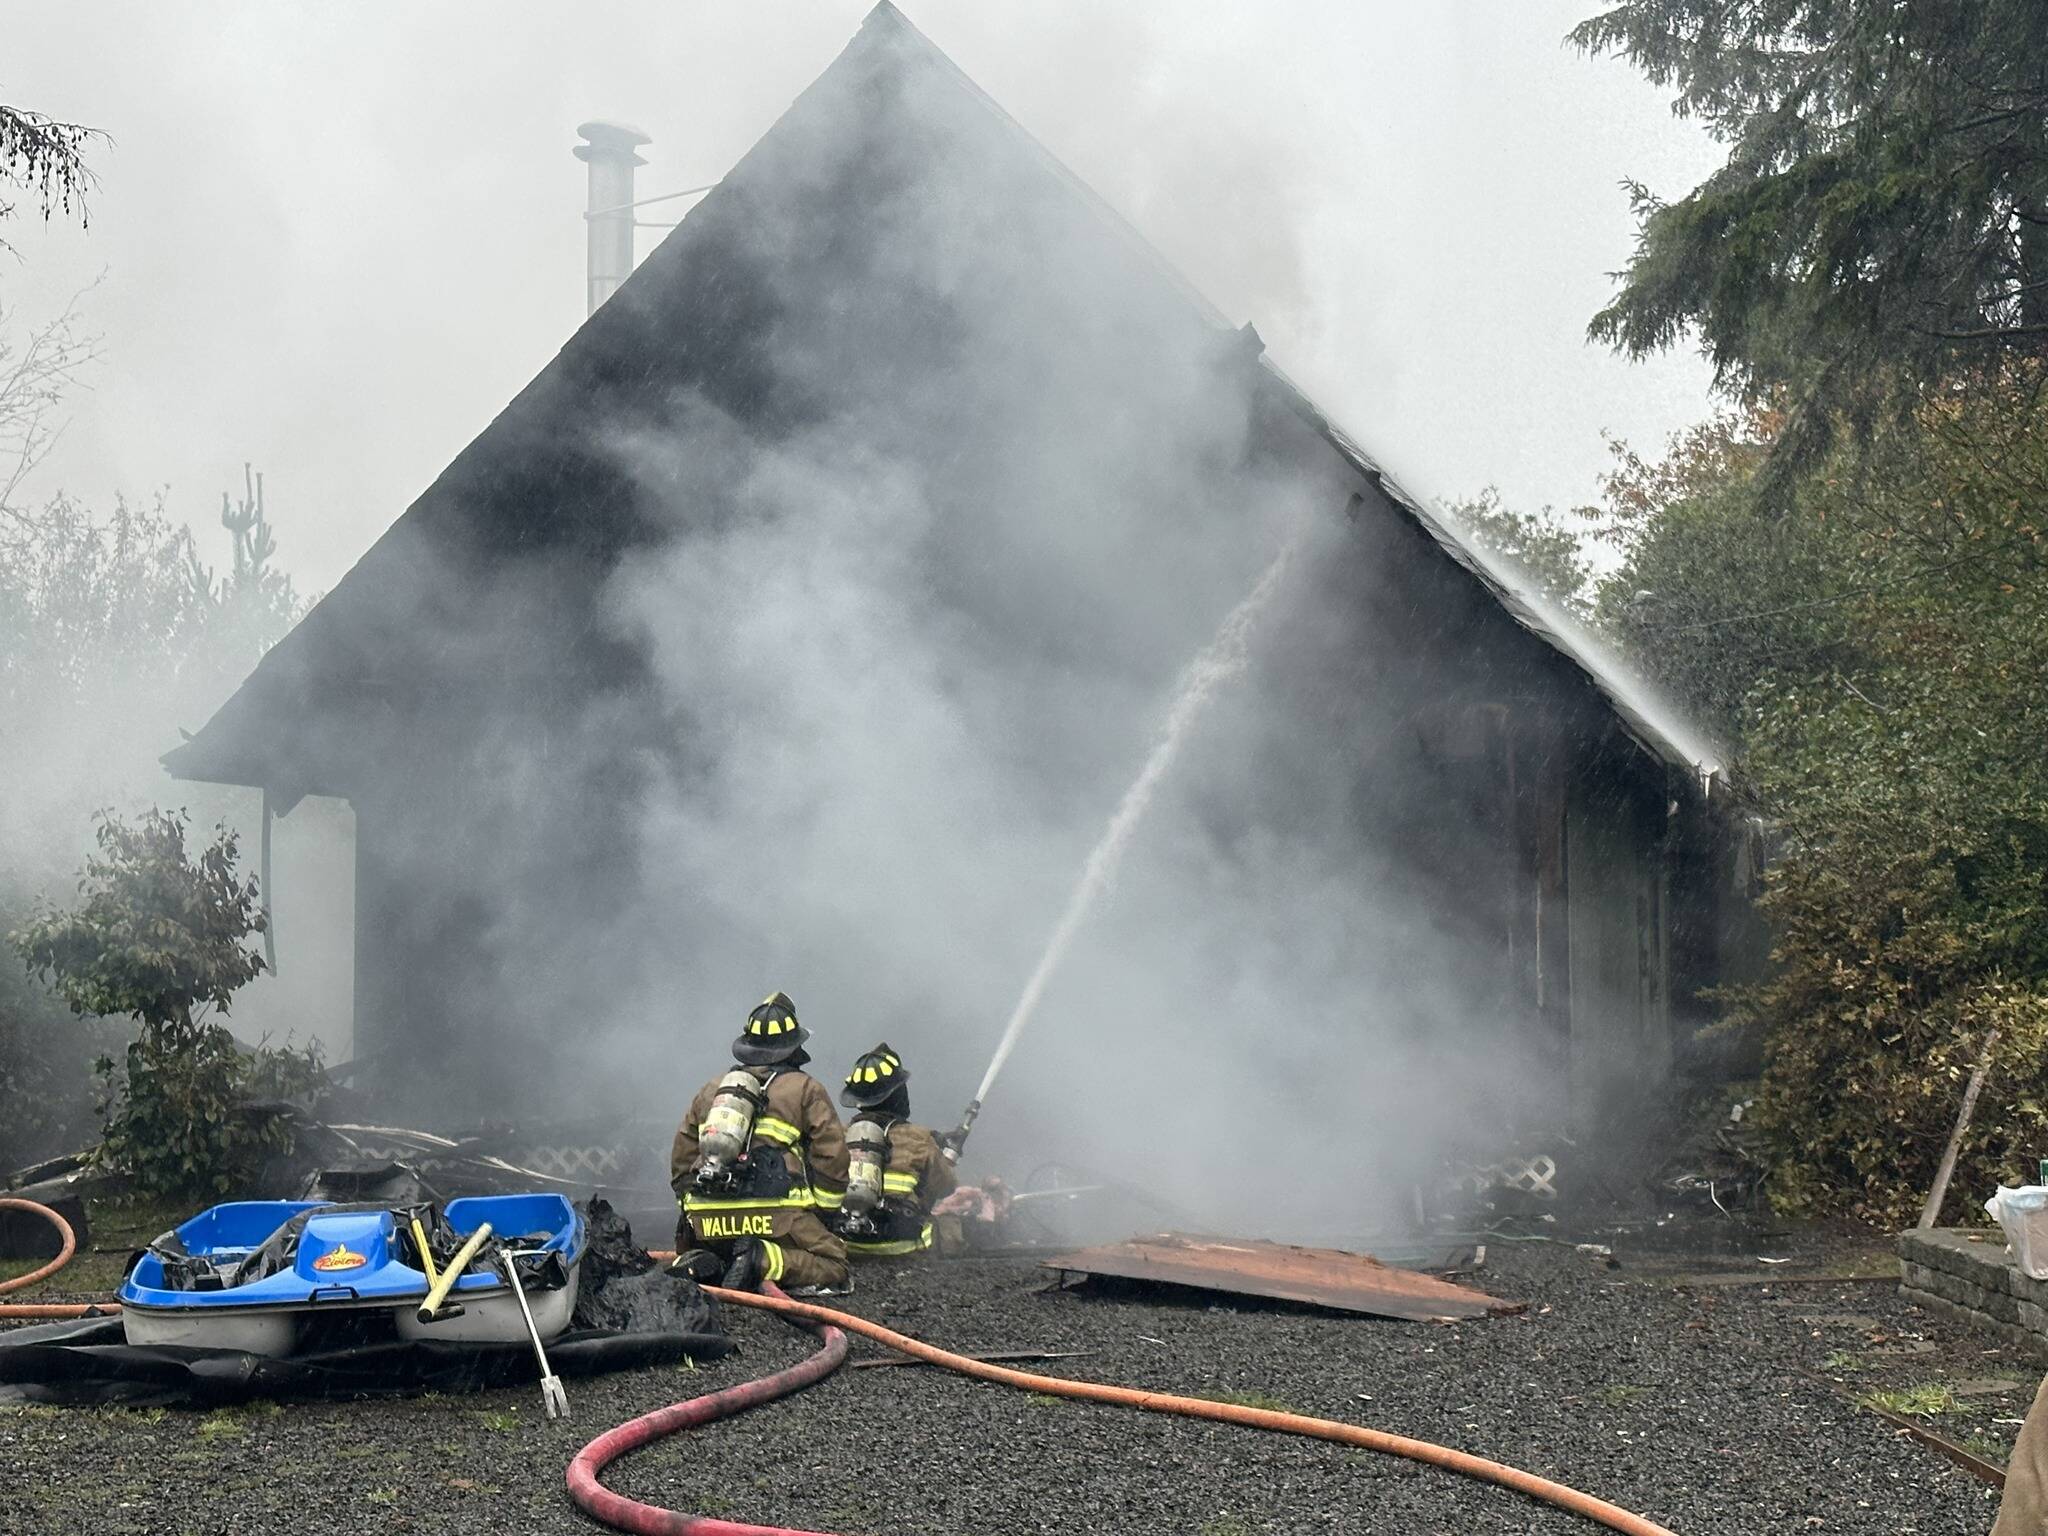 Ocean Shores firefighters attack a house fire on Monday afternoon. (Courtesy photo / OSFD)